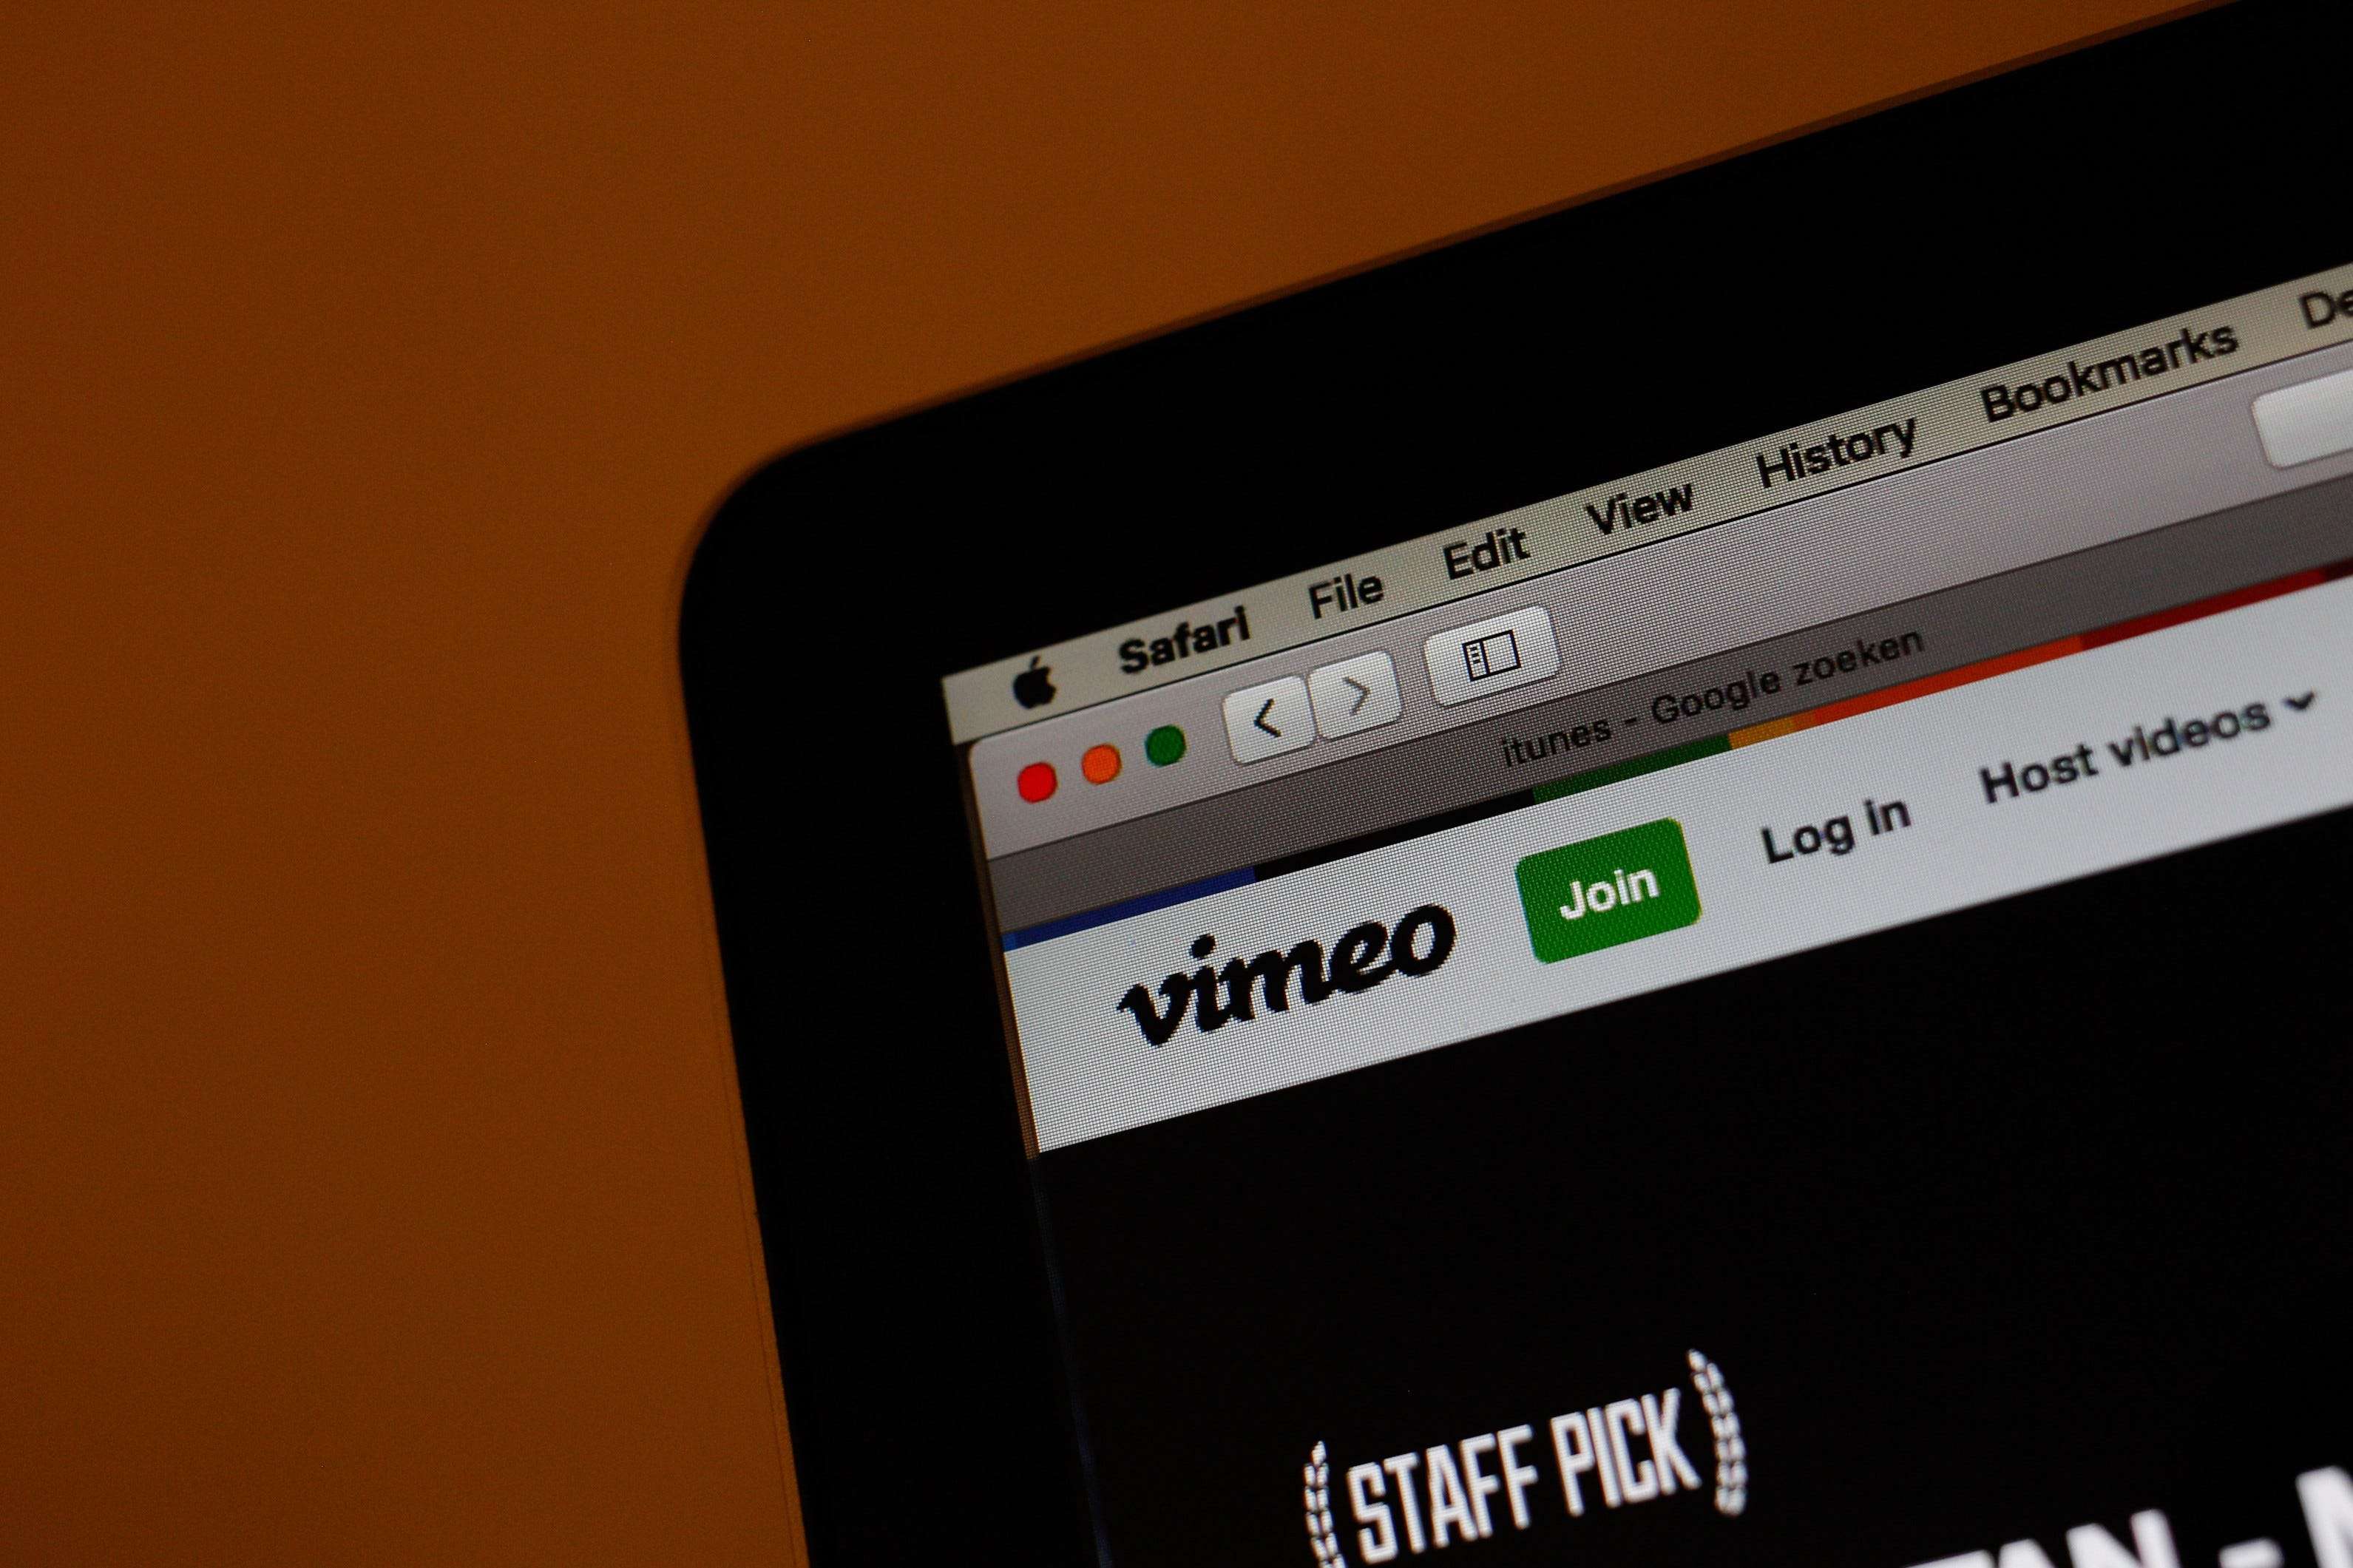 What Is Vimeo? A guide to the tiers and features on the video sharing